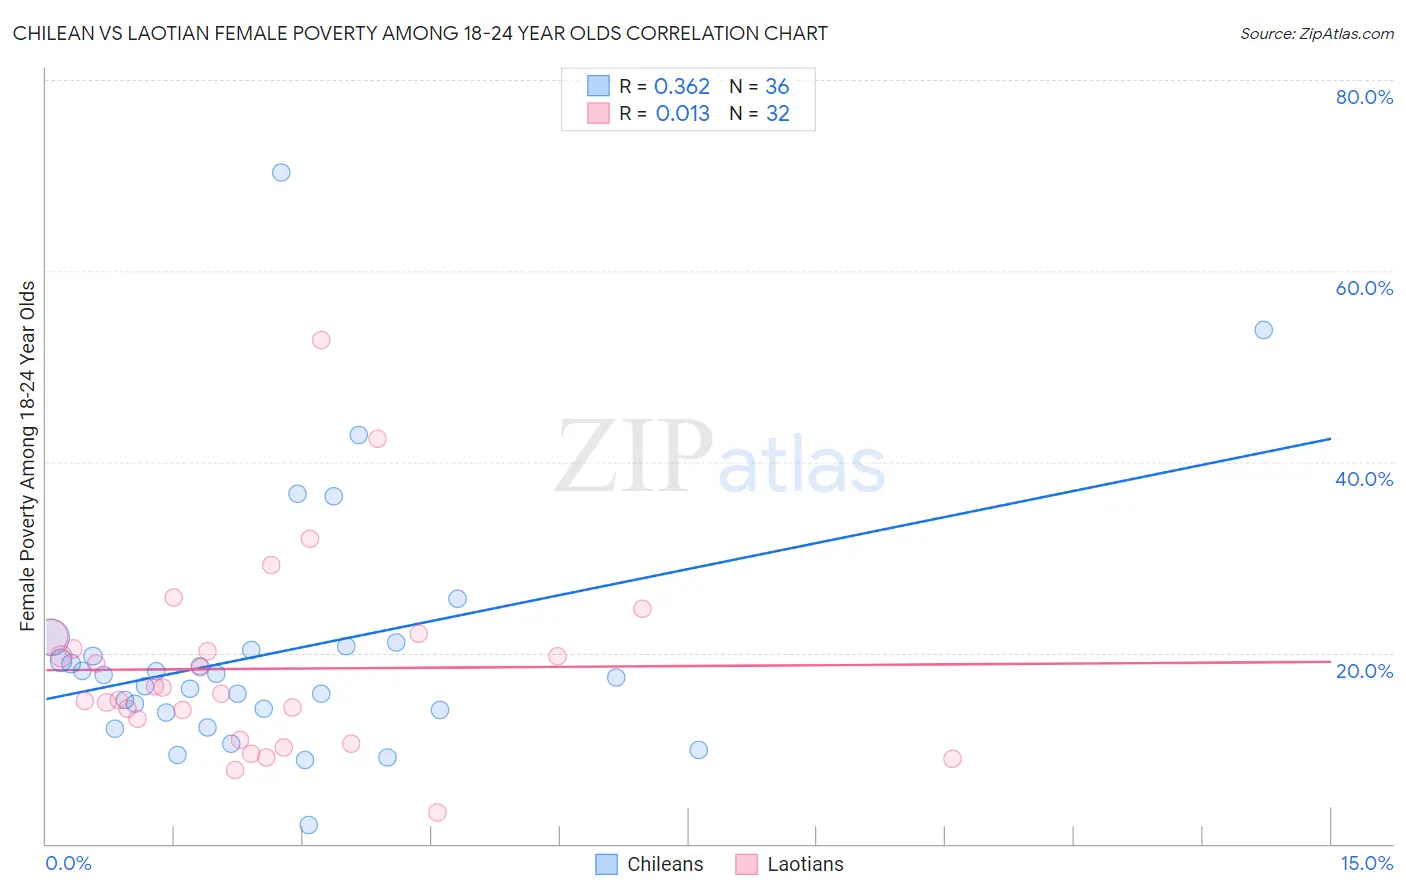 Chilean vs Laotian Female Poverty Among 18-24 Year Olds